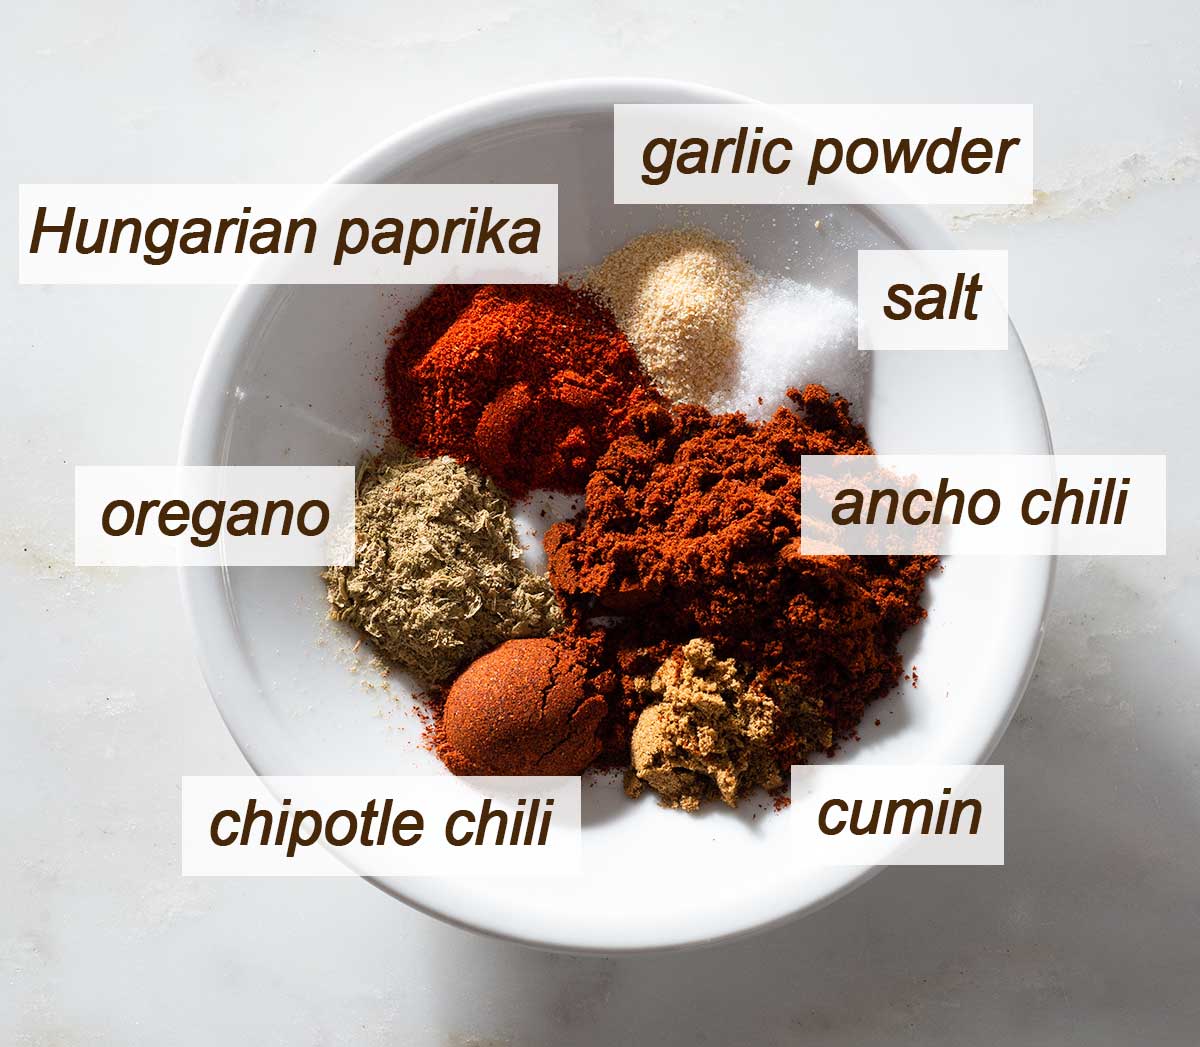 Chili powder ingredients on a plate.